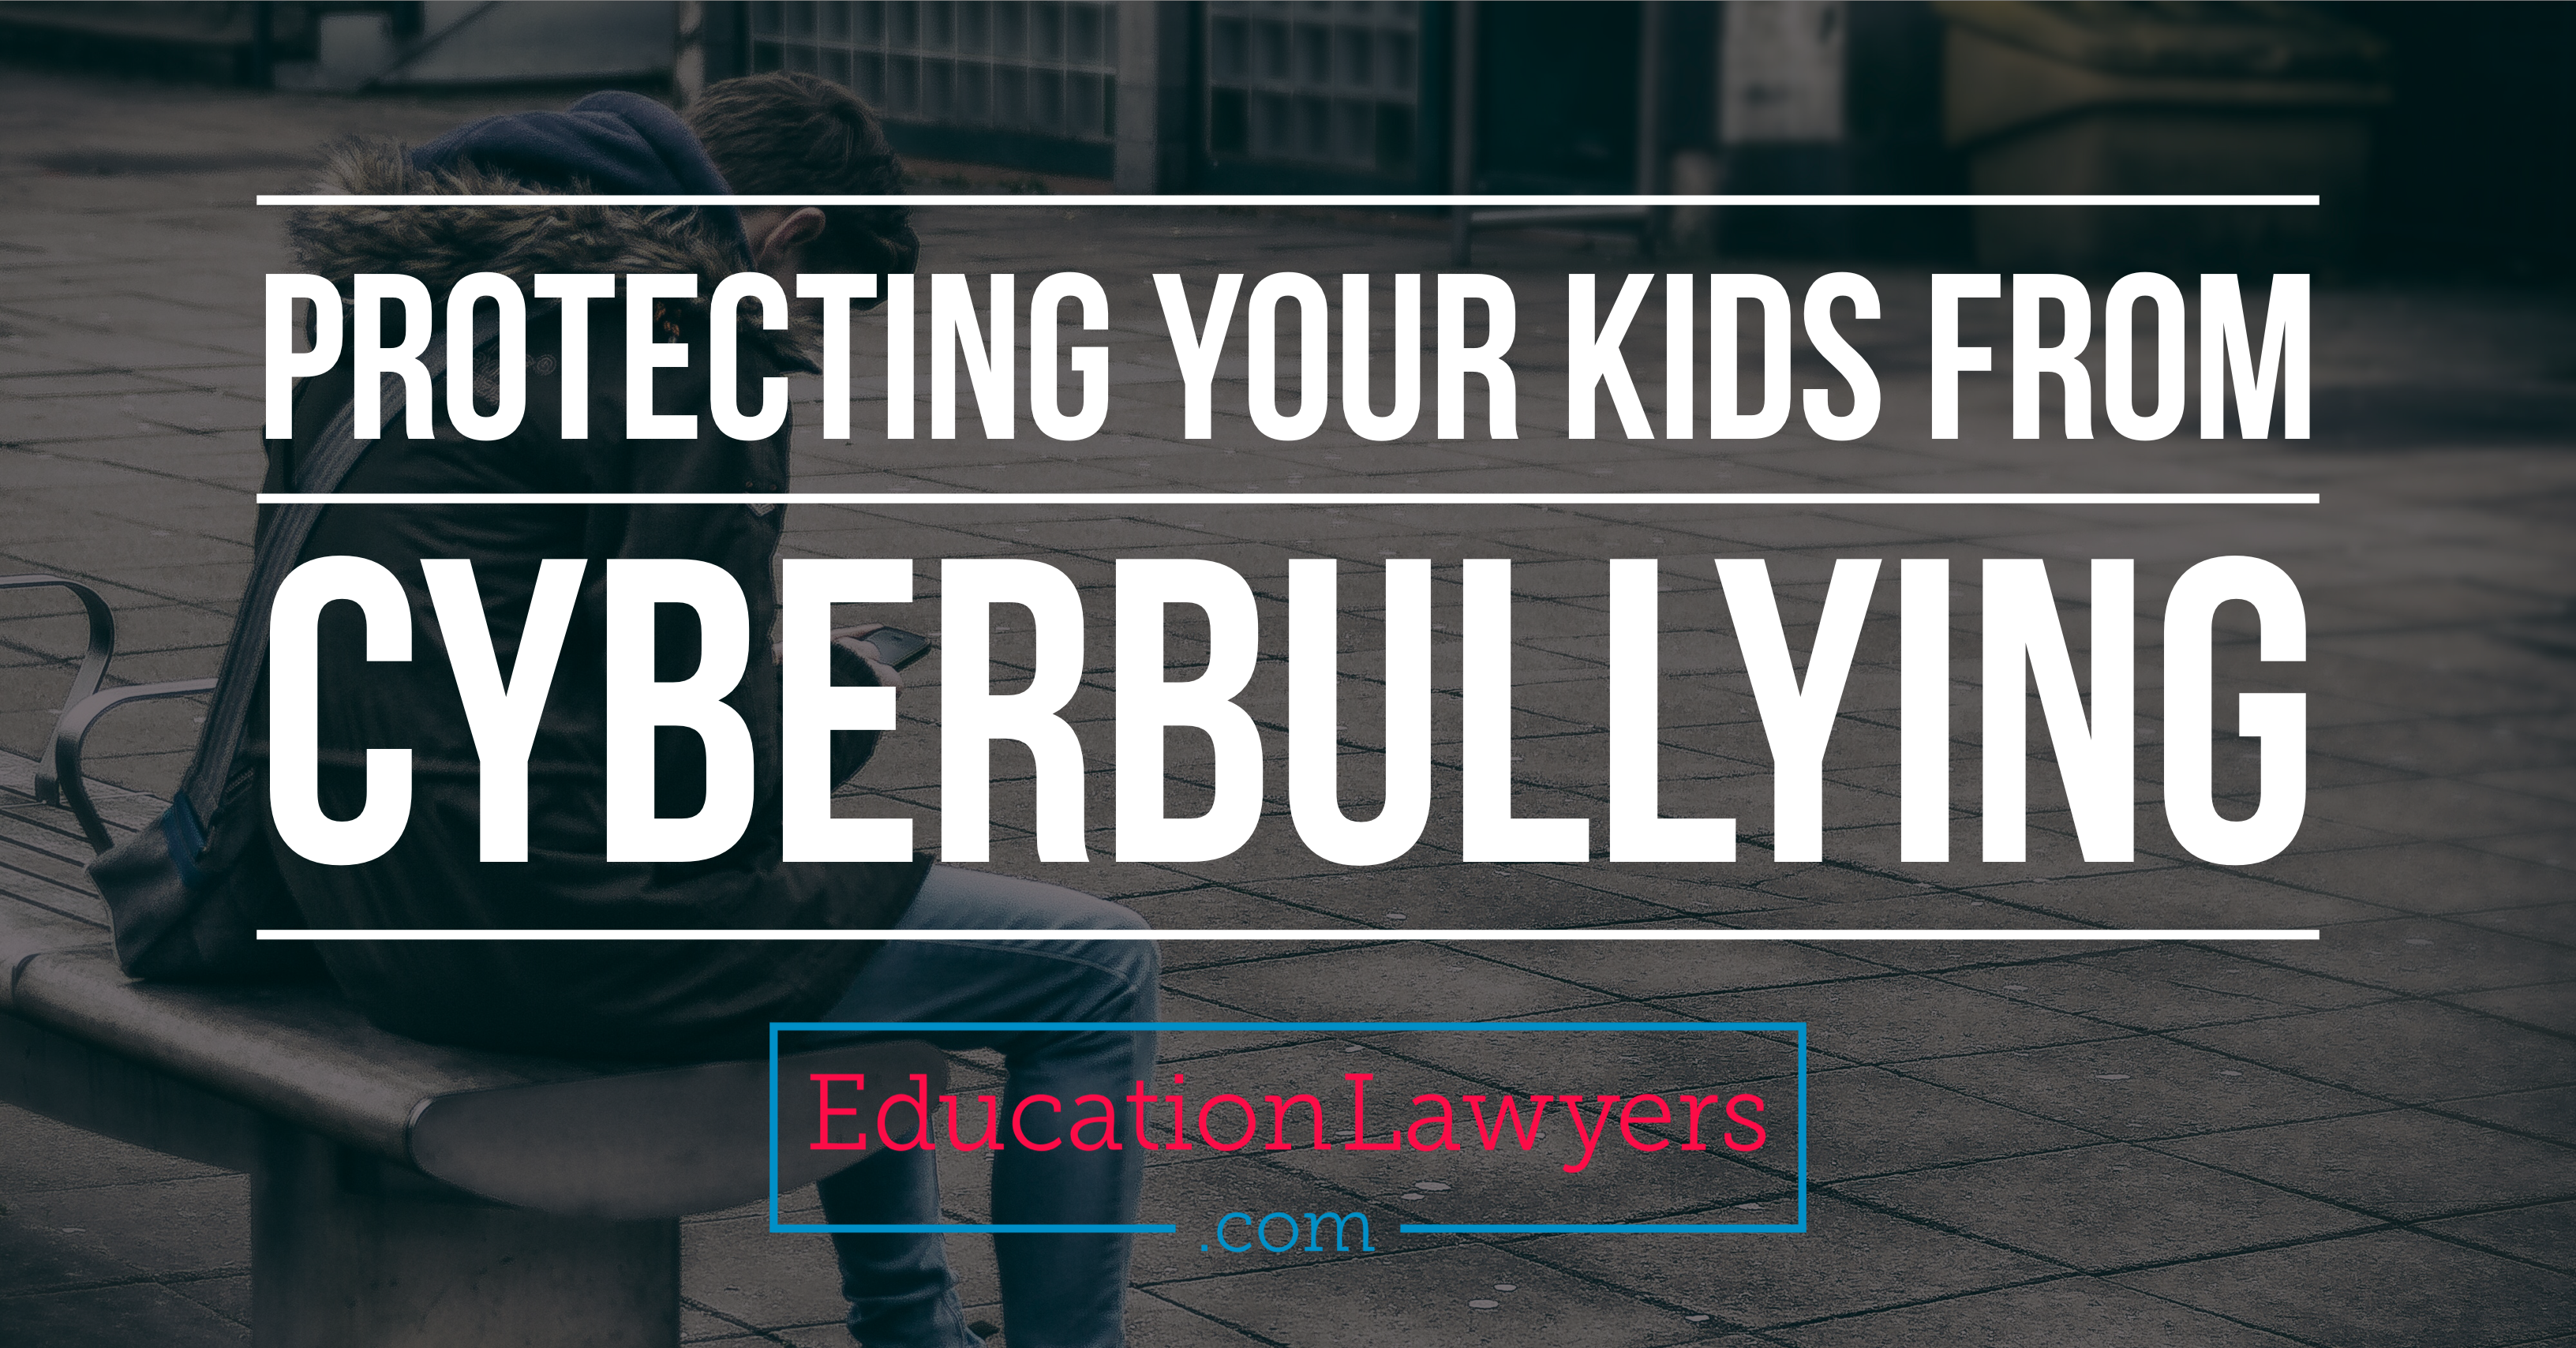 protecting kids cyberbullying